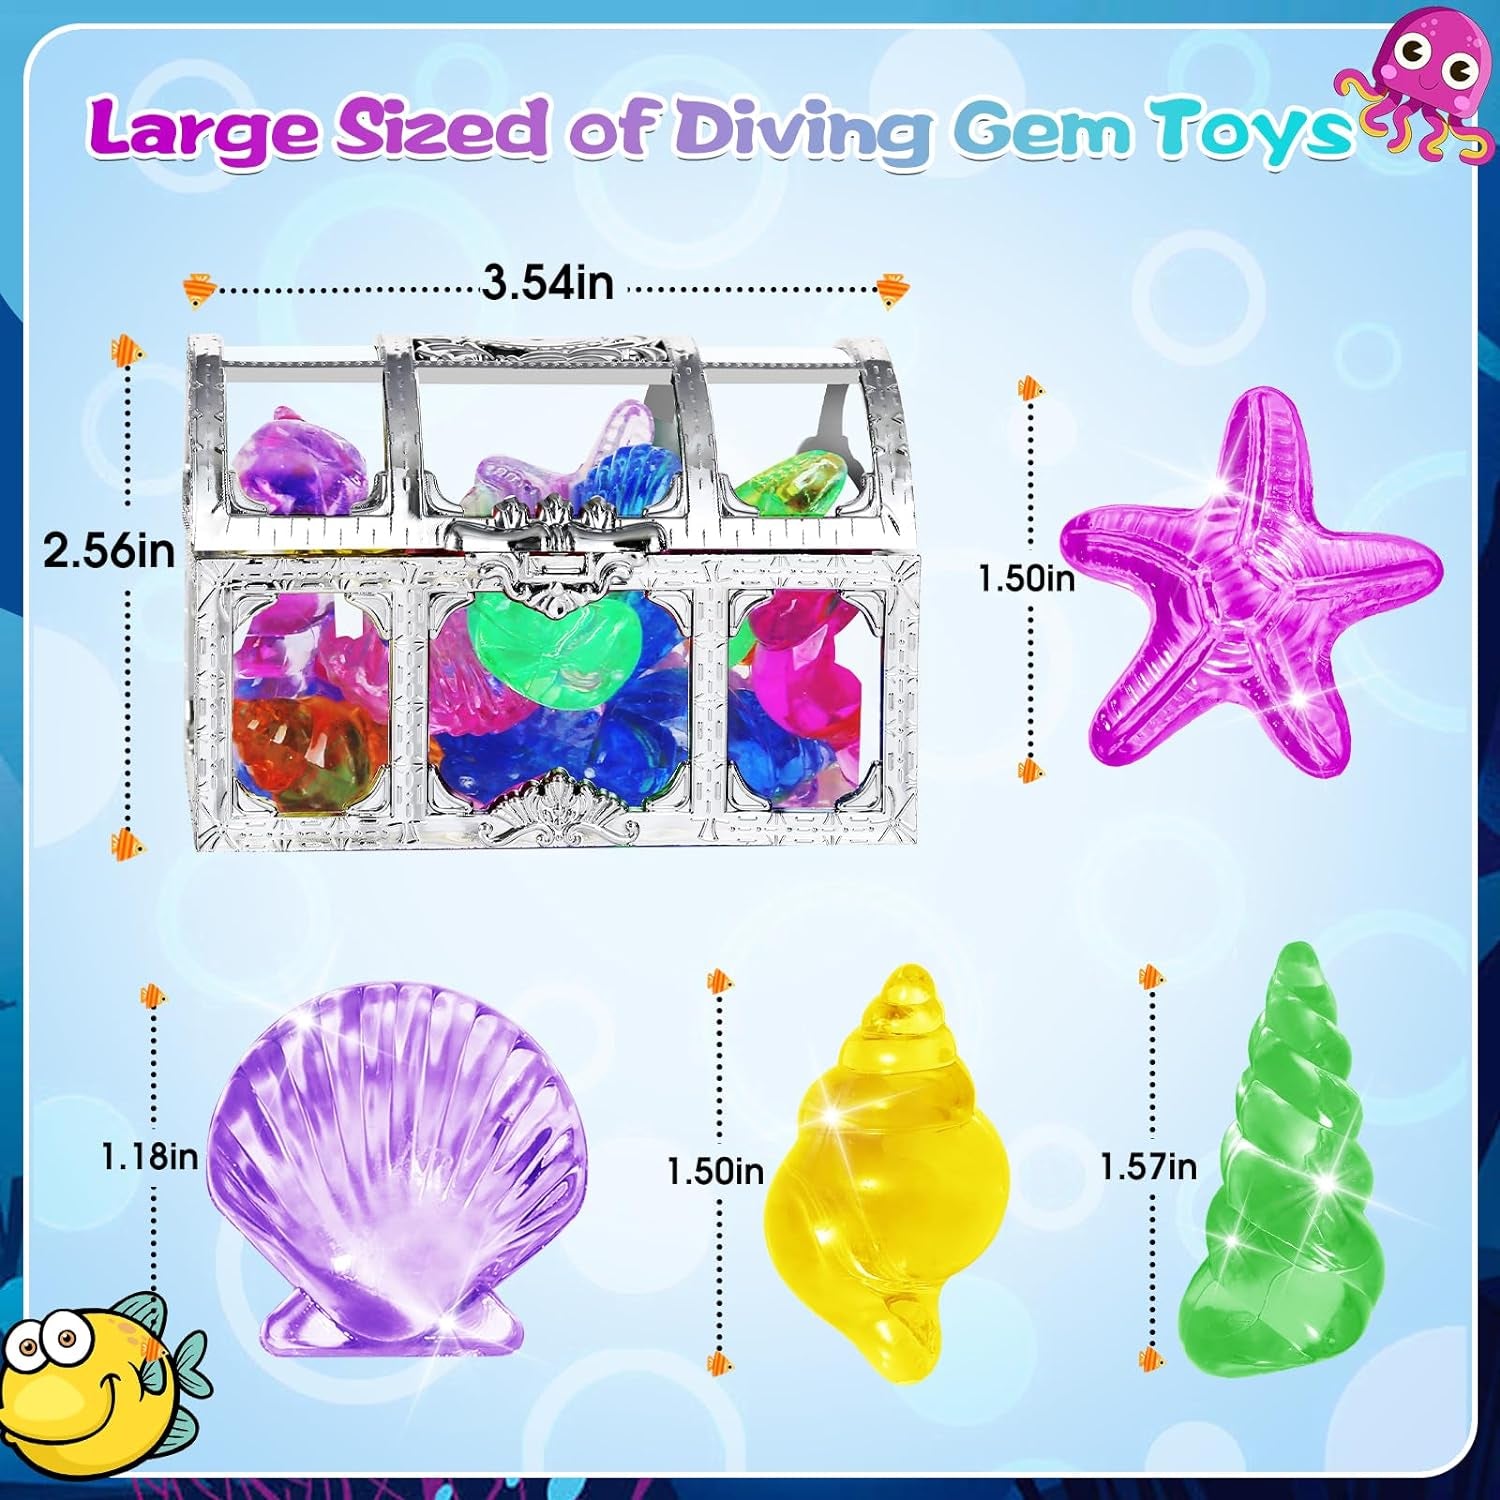 Pool Toys, 36 Pcs Dive Gems Pool Toys for Kids Ages 4-8, 8-12, Summer Throw Pool Toys with Assorted Diving Gems and 2 Treasure Boxes, Summer Beach Toys for Boys and Girls